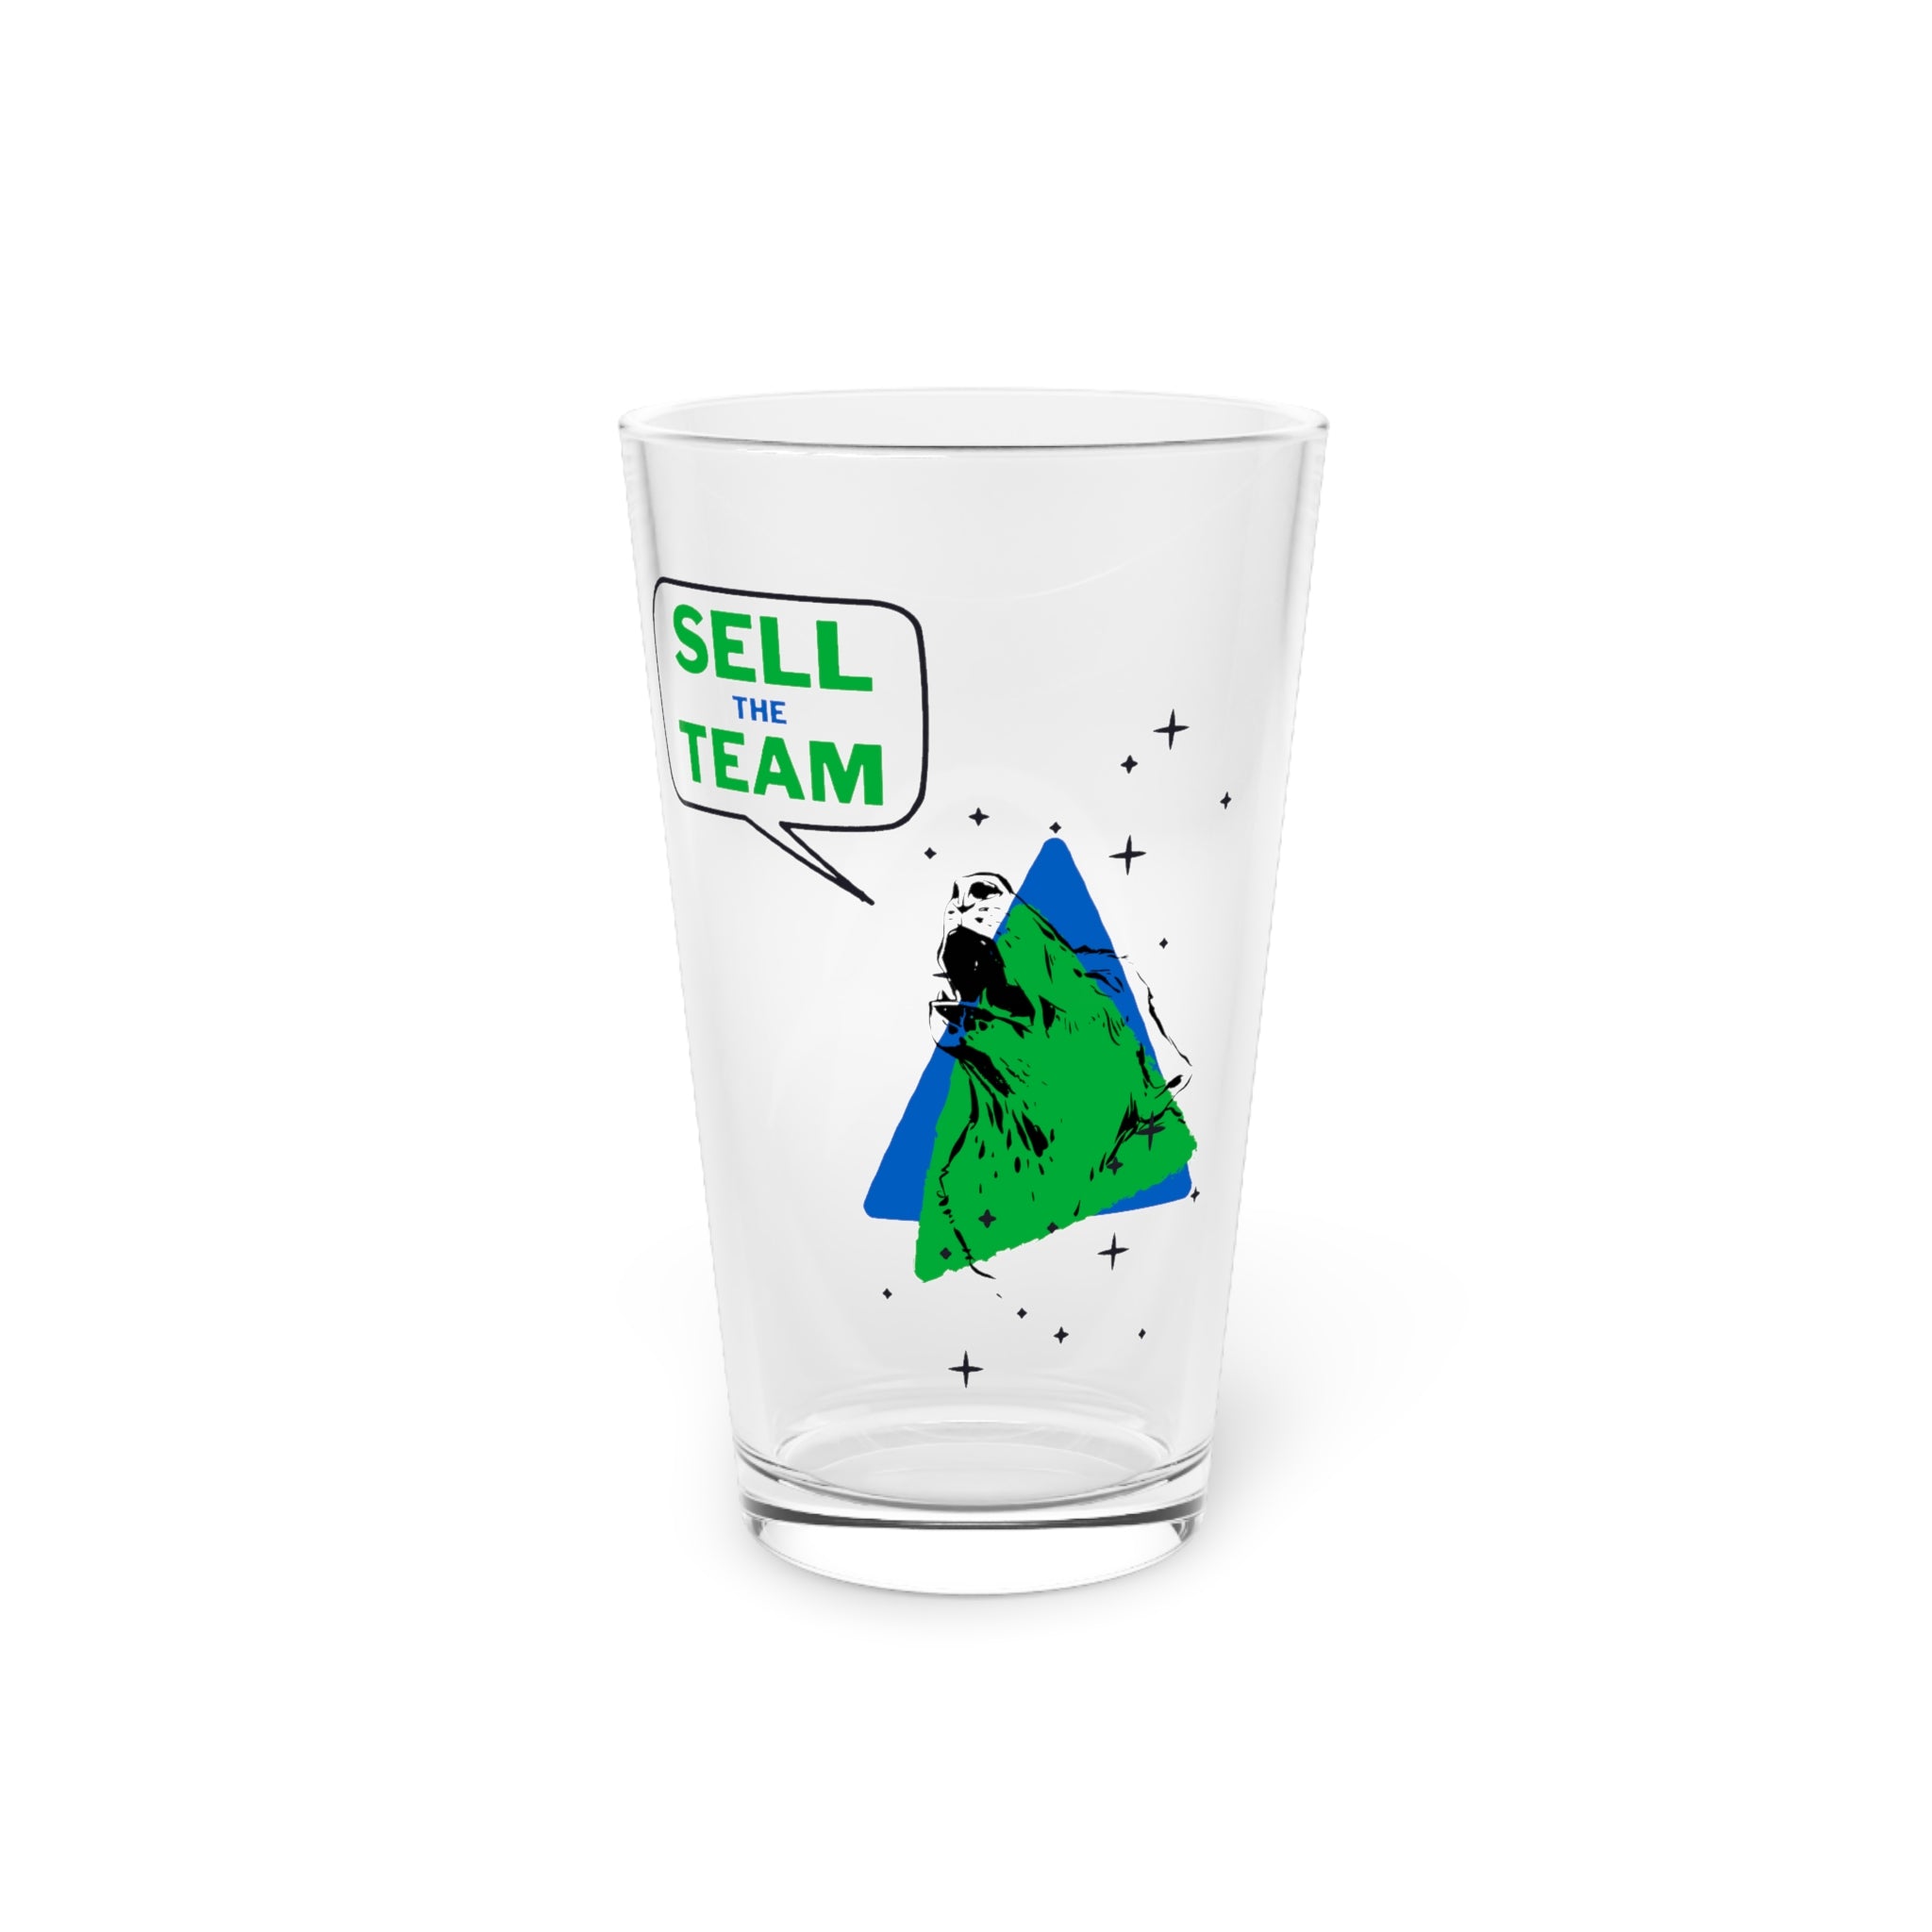 Sell The Team - Pint Glass, 16oz